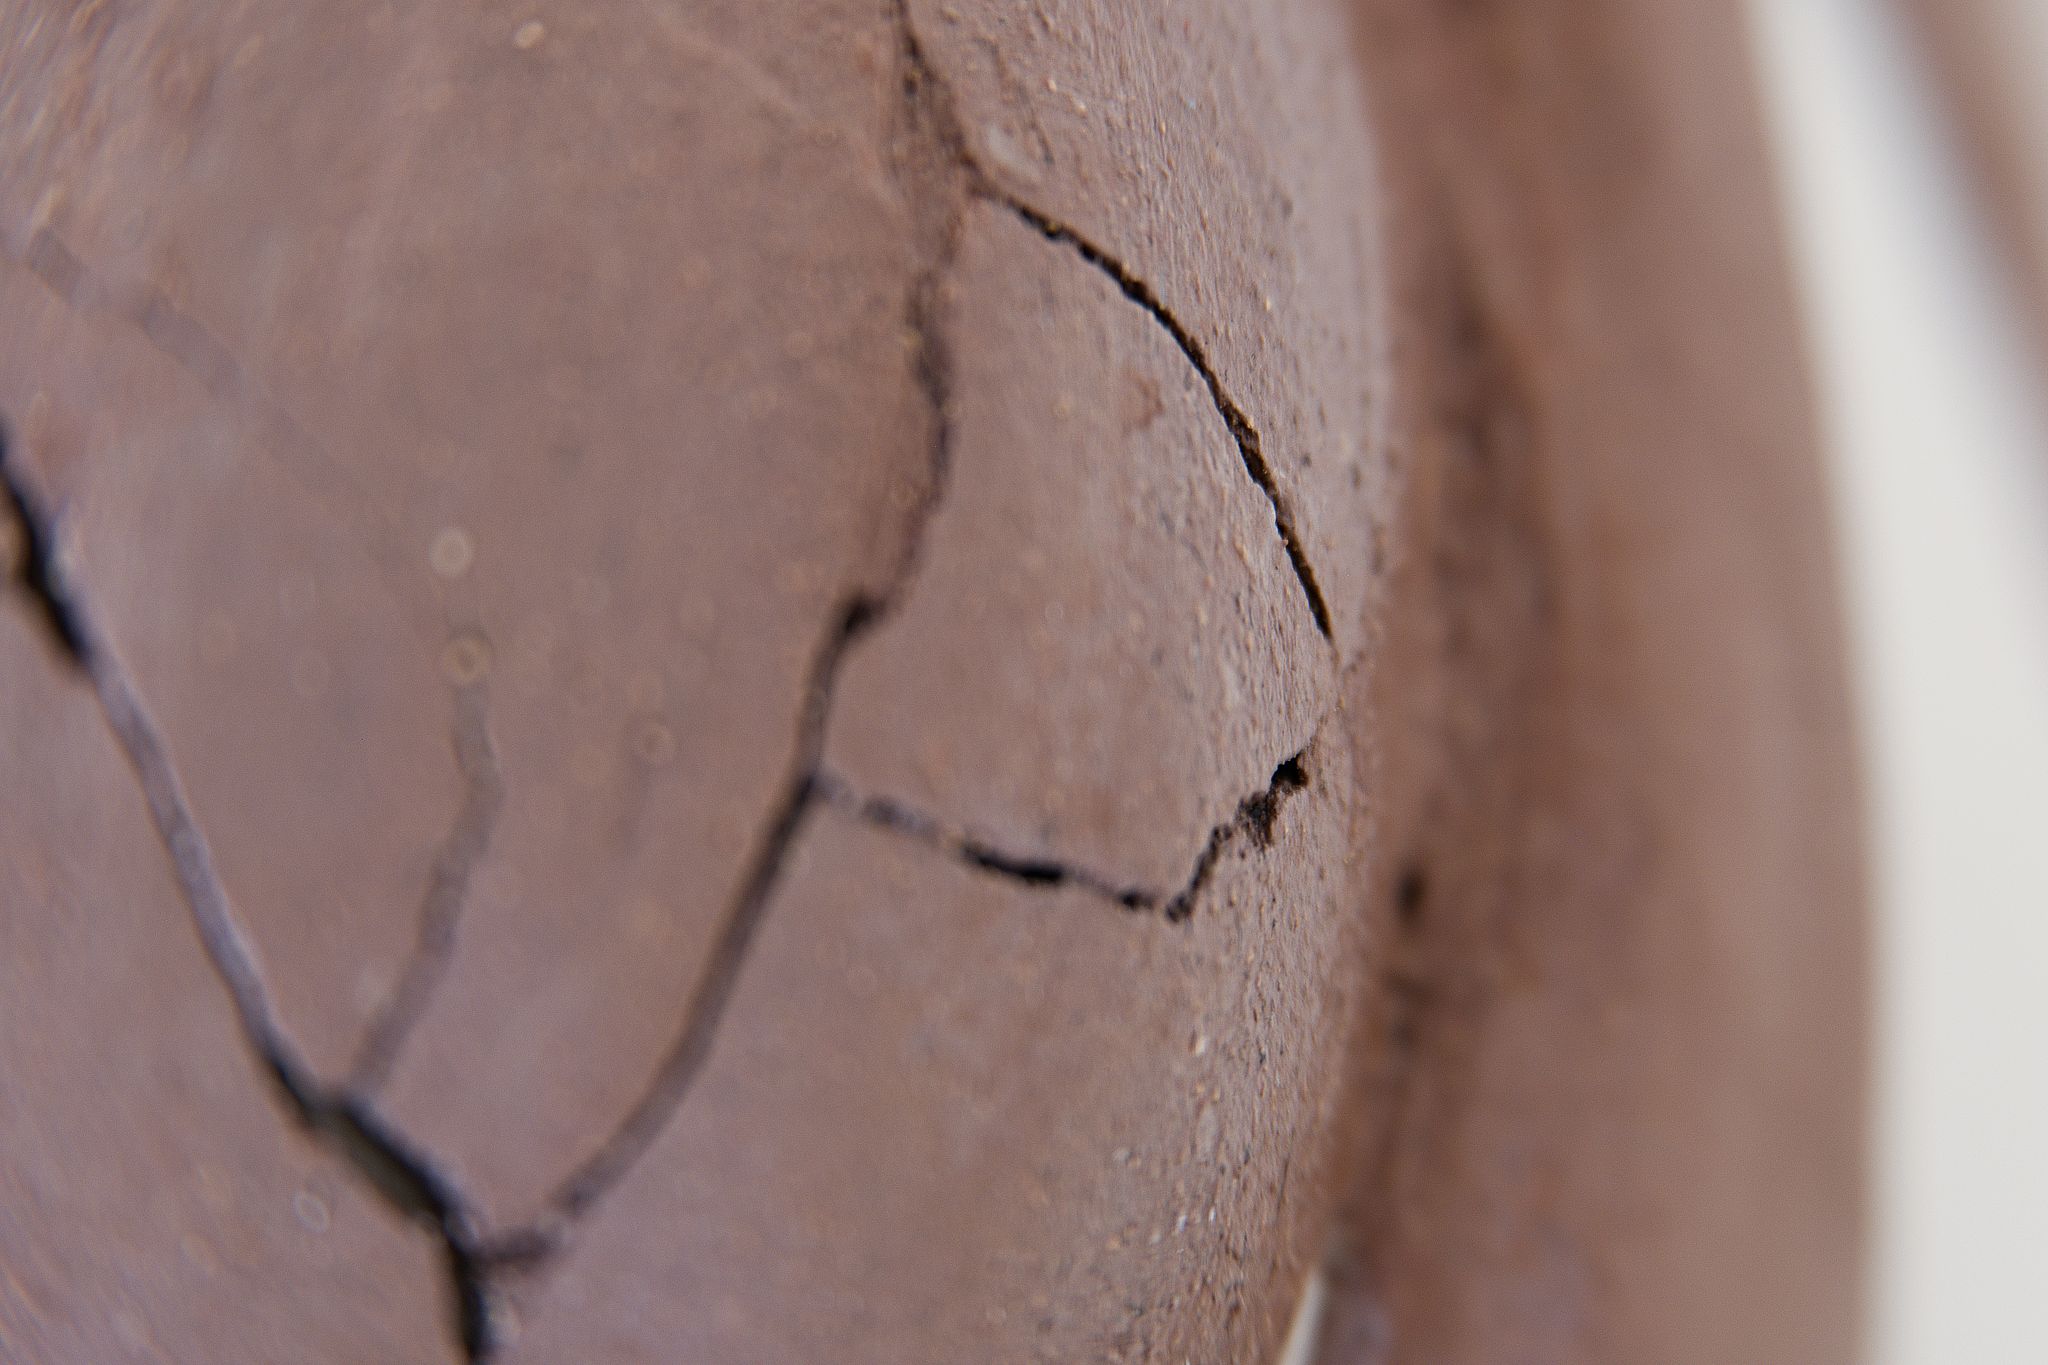 Macro showing cracks in the clay at a glancing angle, the light being diffusely reflected from the brighter background